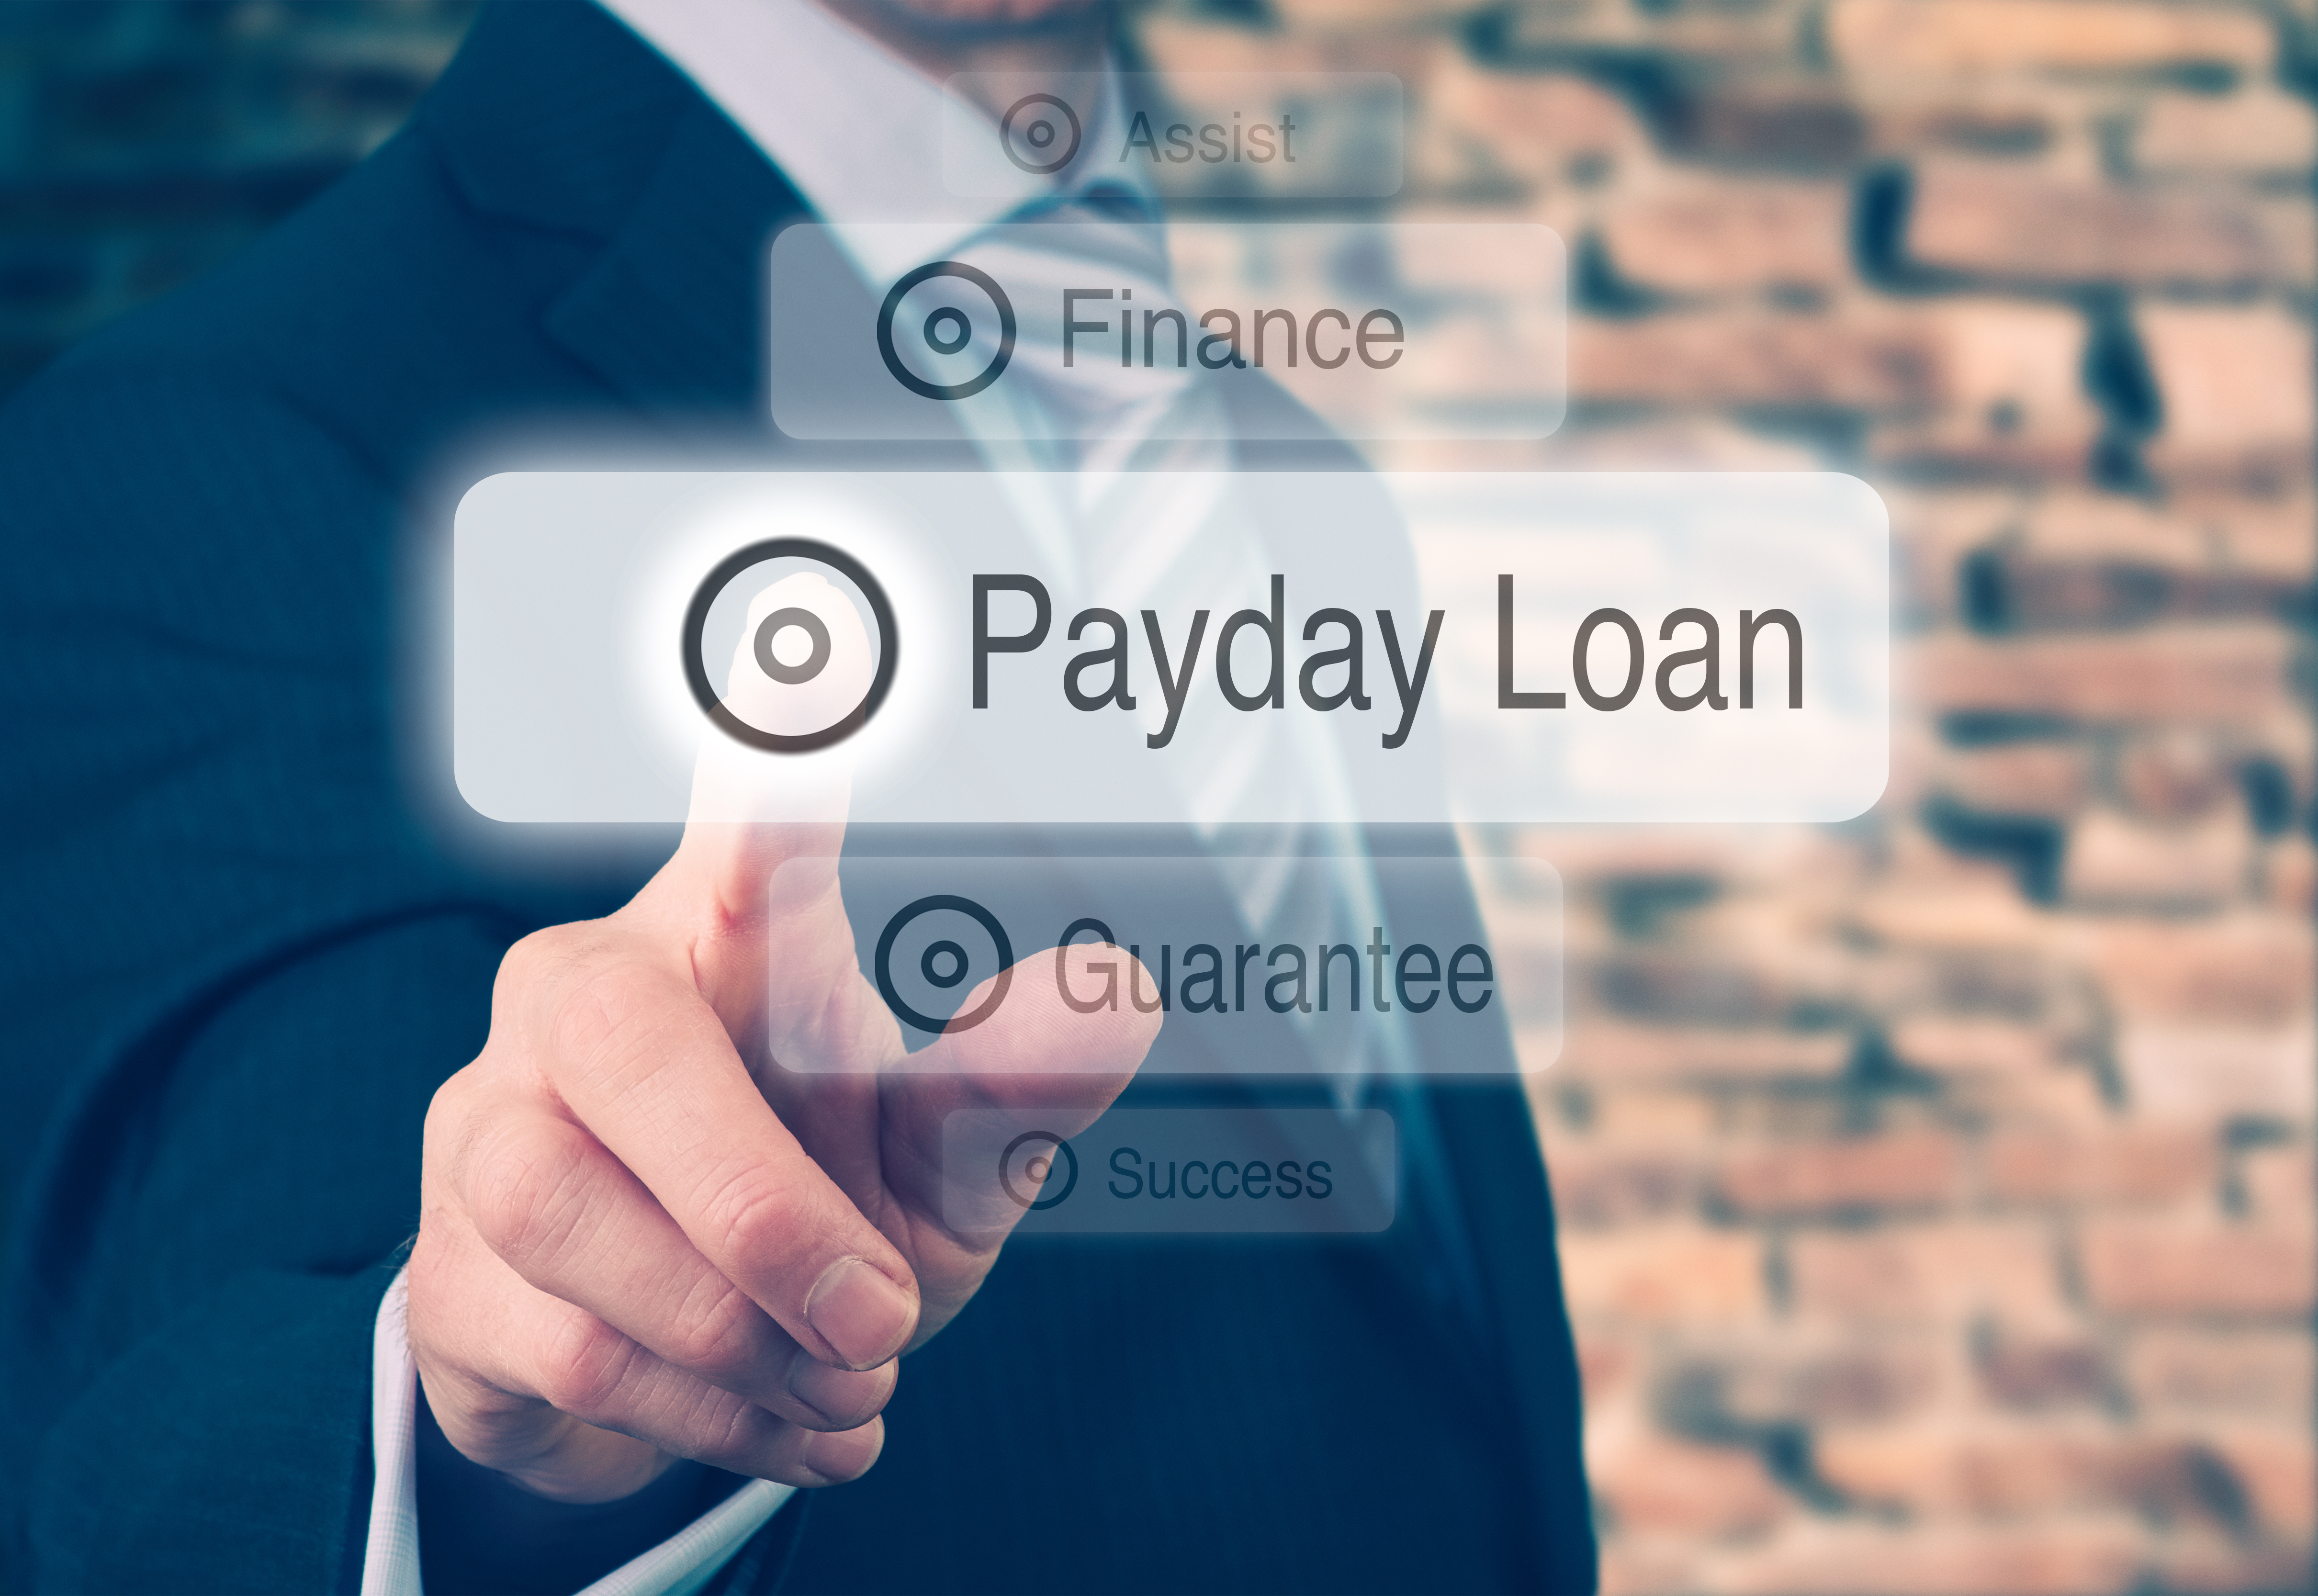 What Are Payday Loans? Your Guide to Understanding Payday Loans